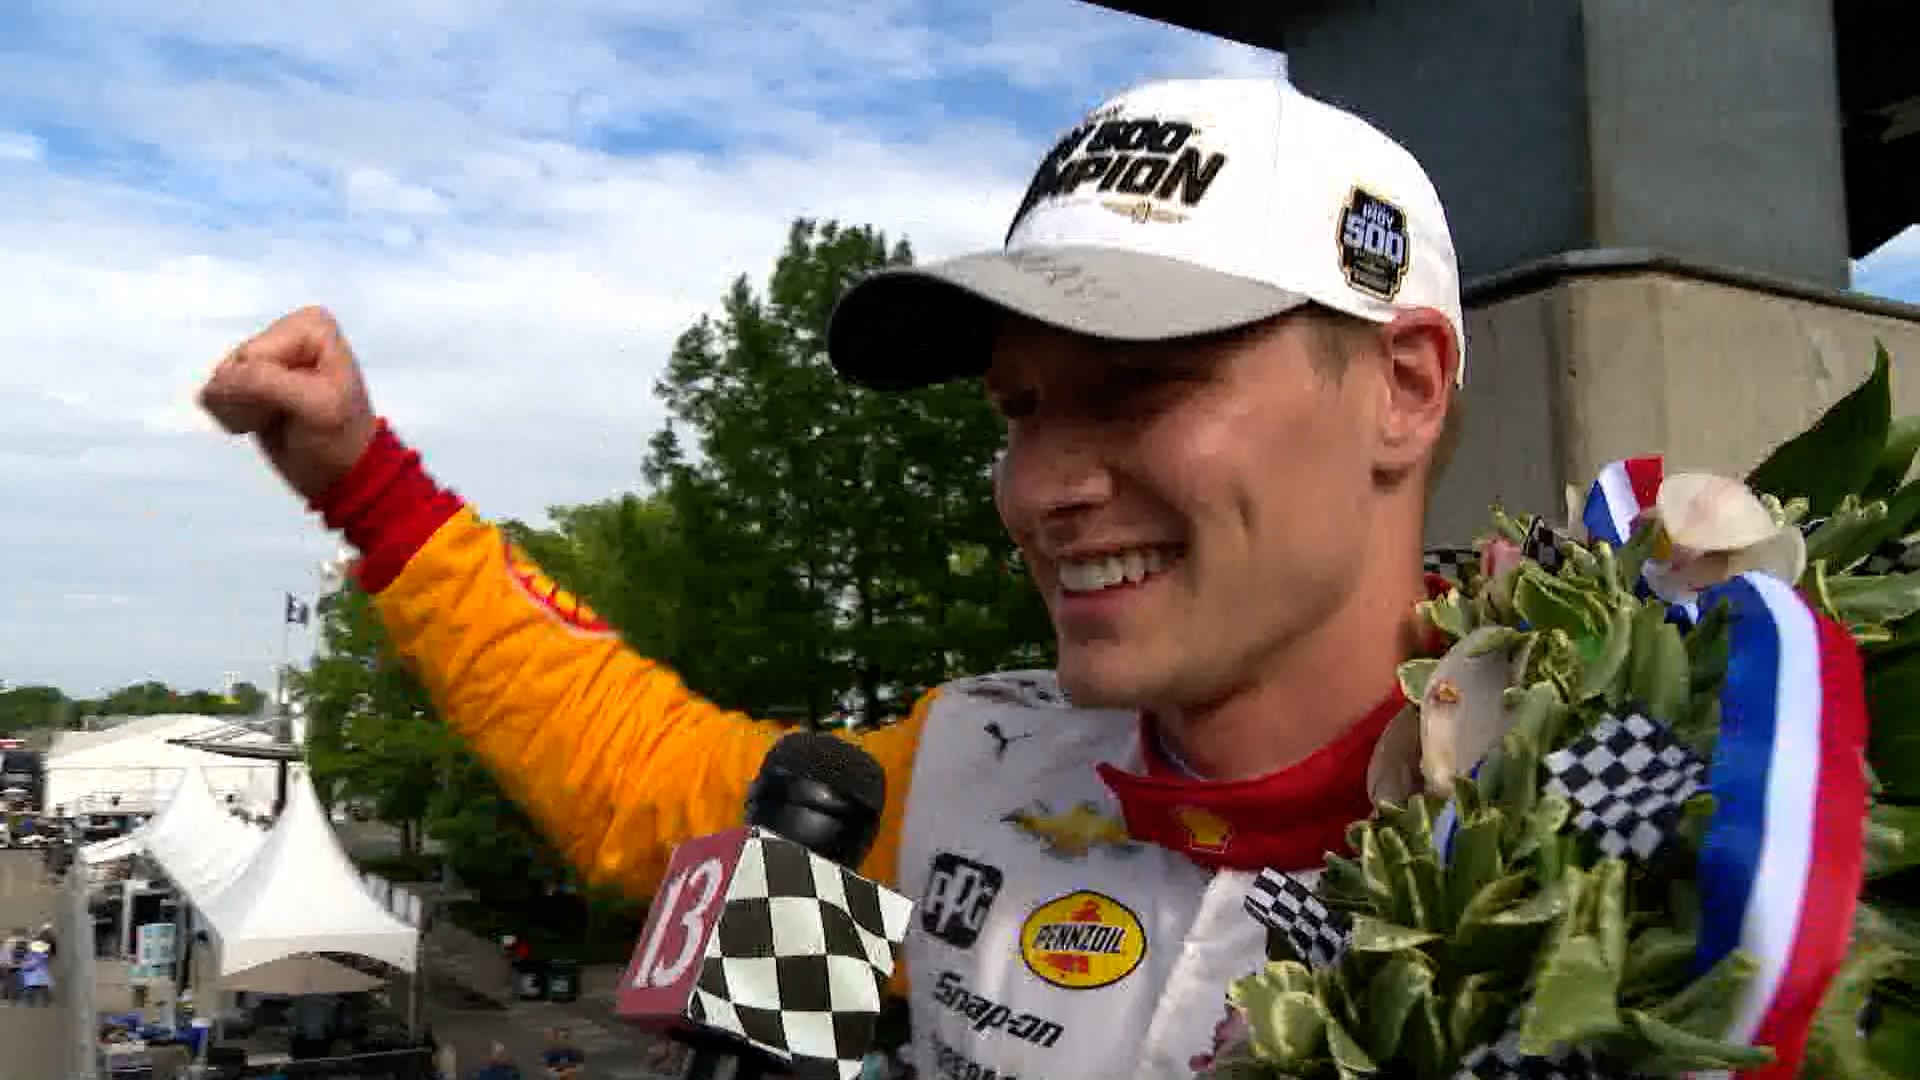 Newgarden gave team owner Roger Penske his 19th win and first since buying Indianapolis Motor Speedway.